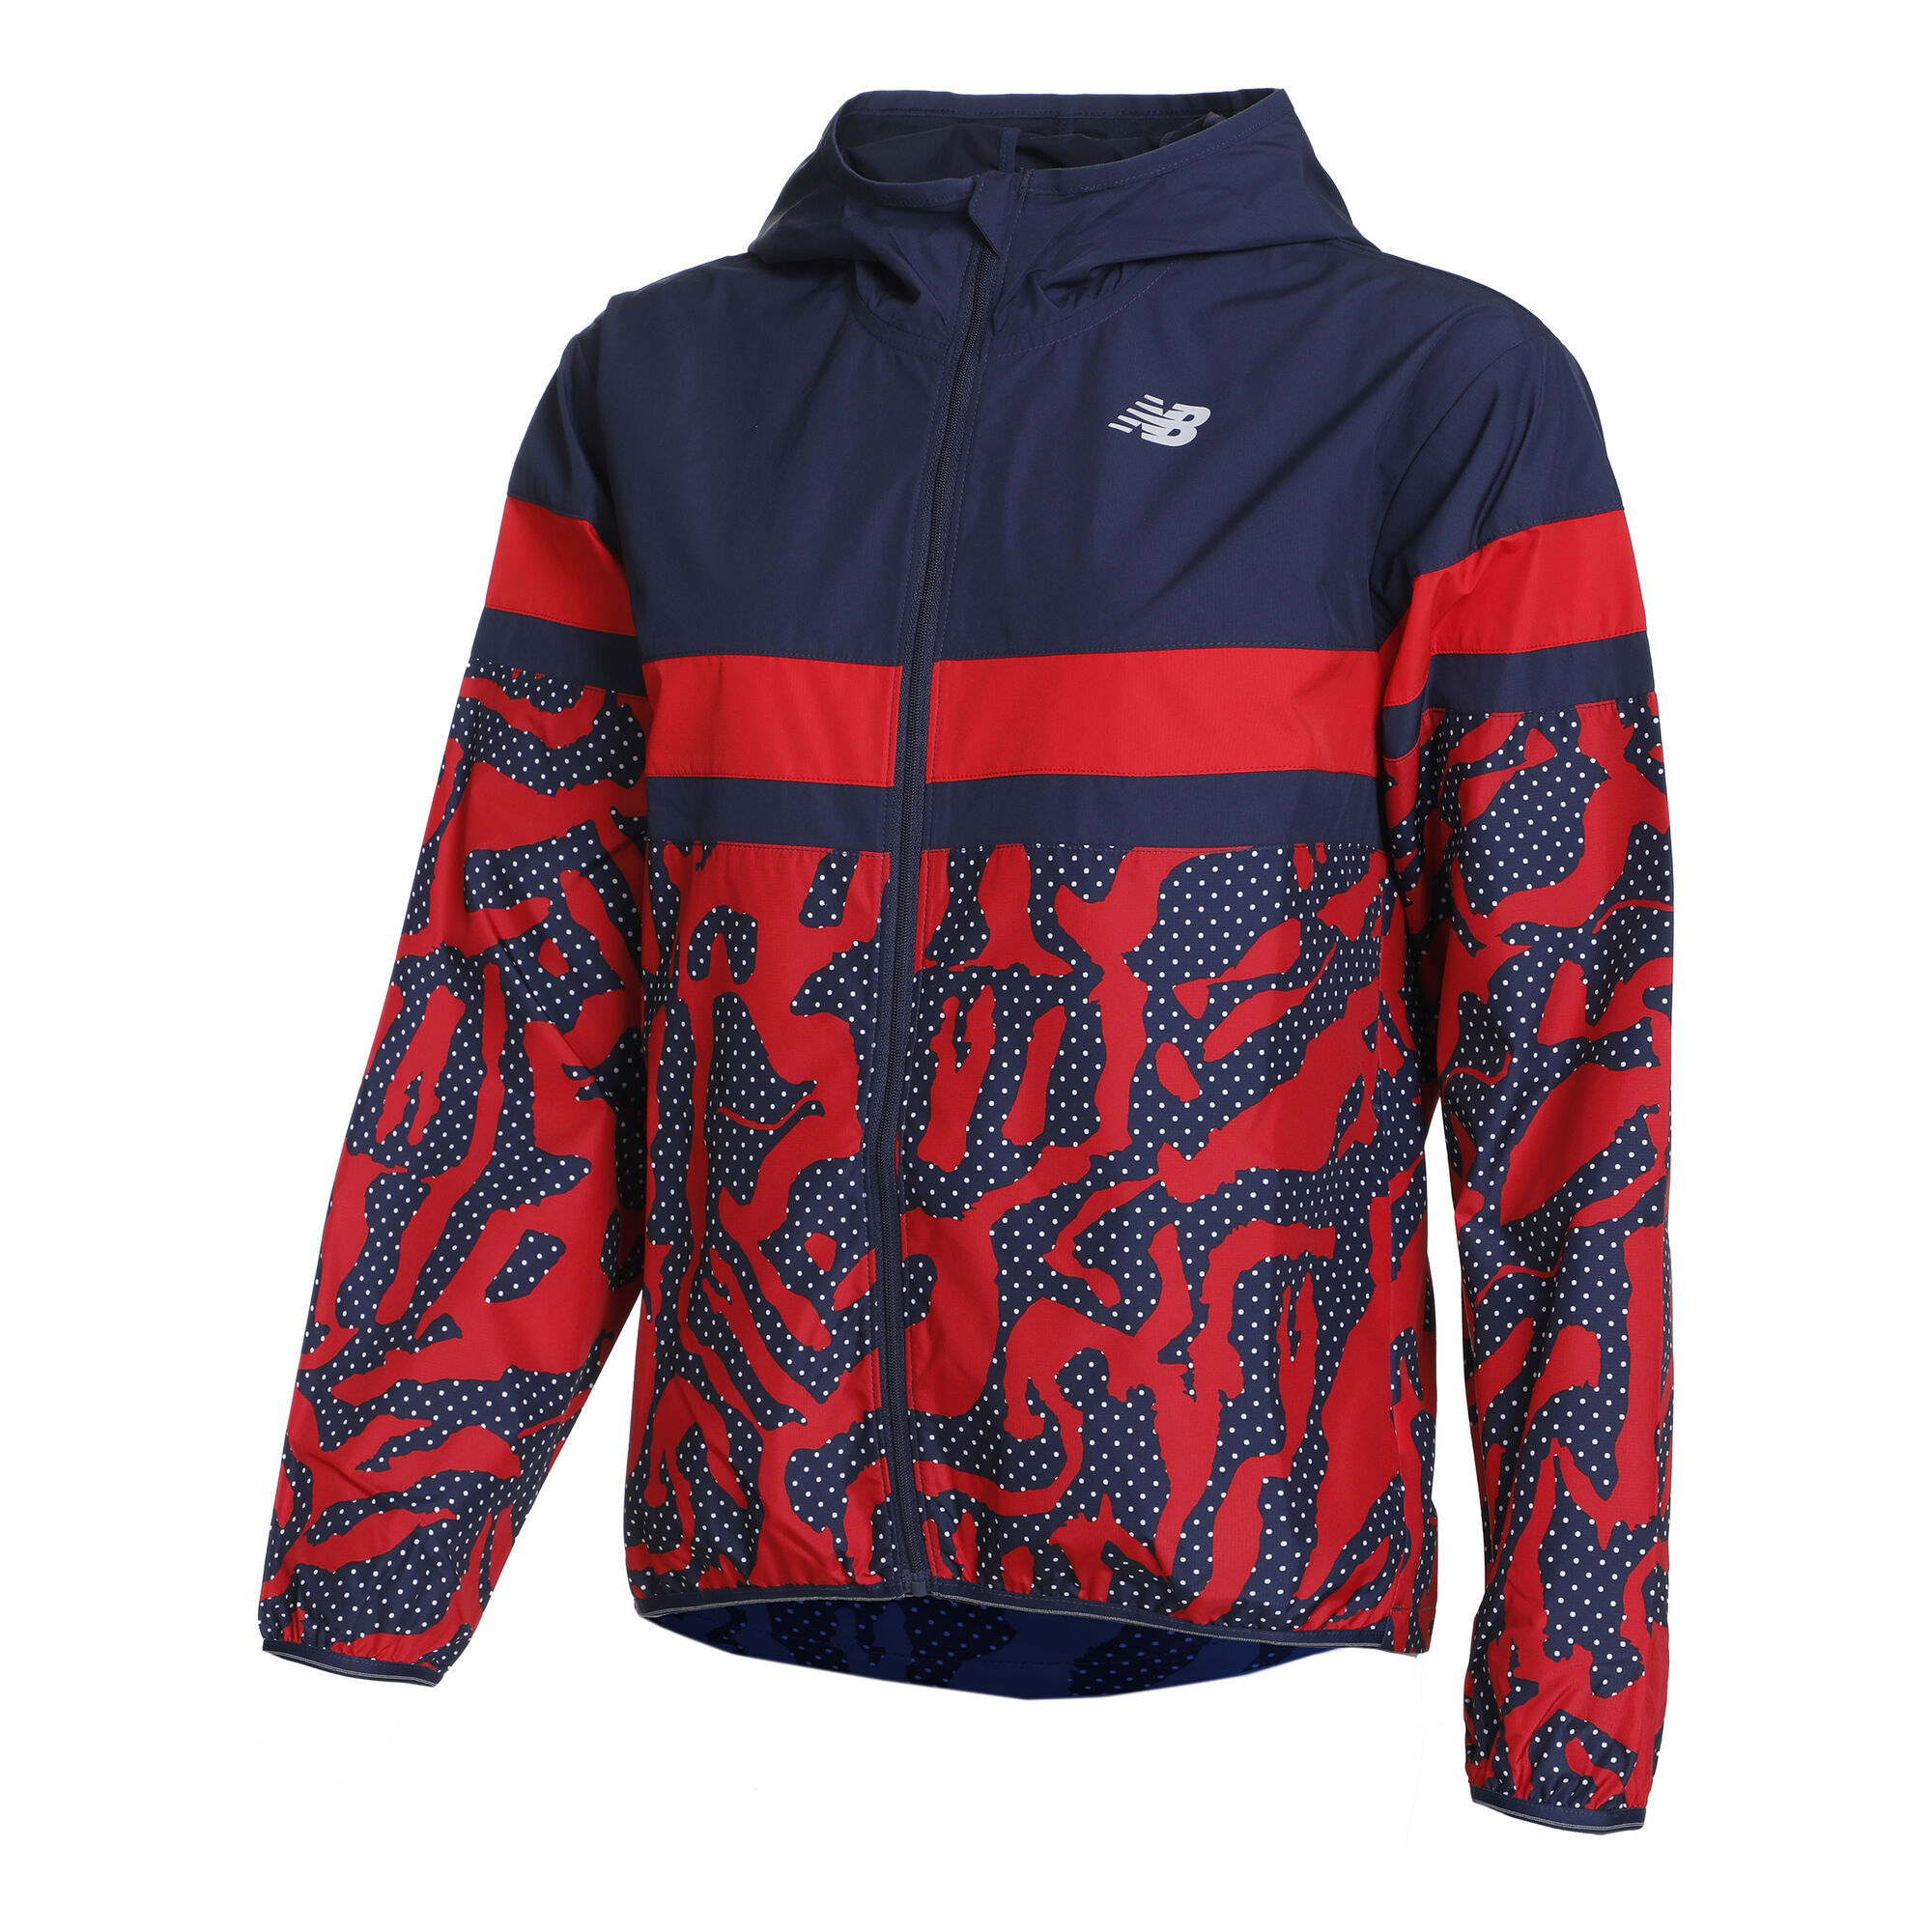 Buy New Balance Printed Accelerate Running Jacket Women Red, Blue